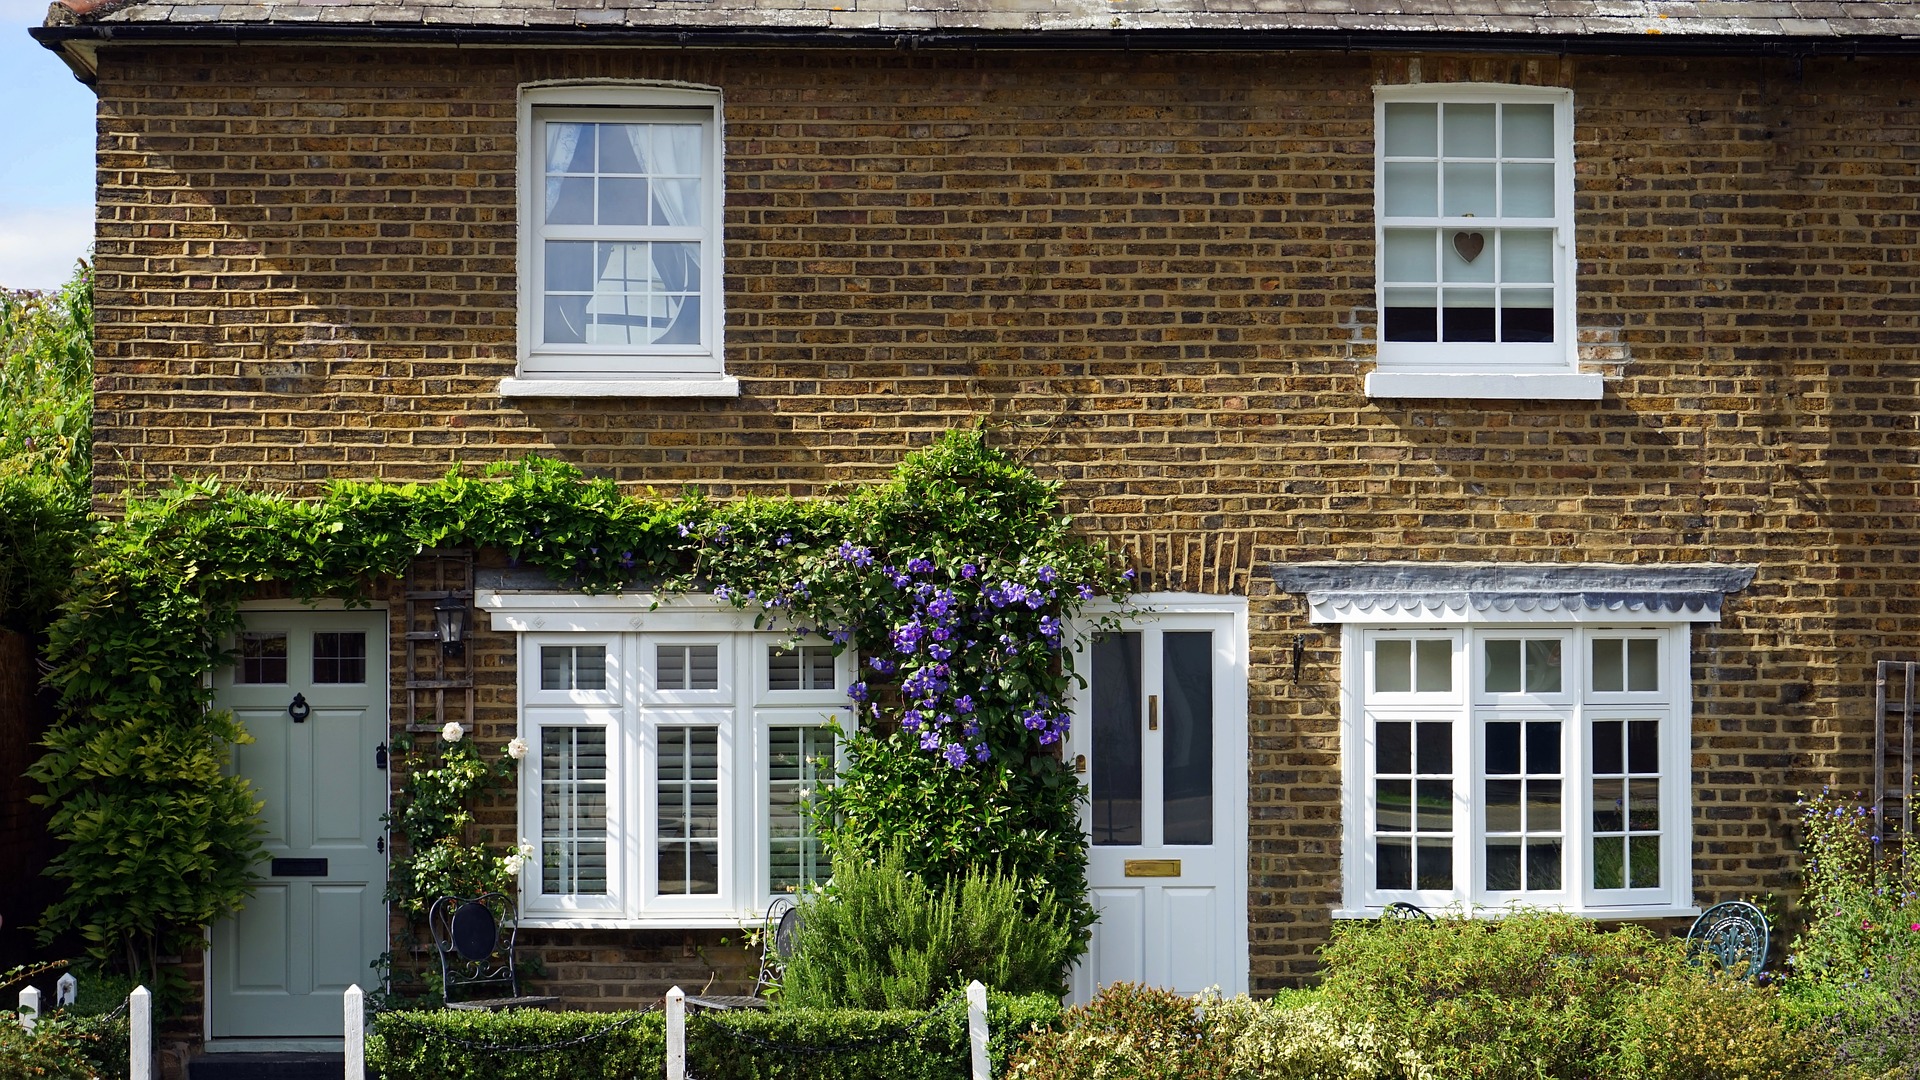 Does your house have kerb appeal?